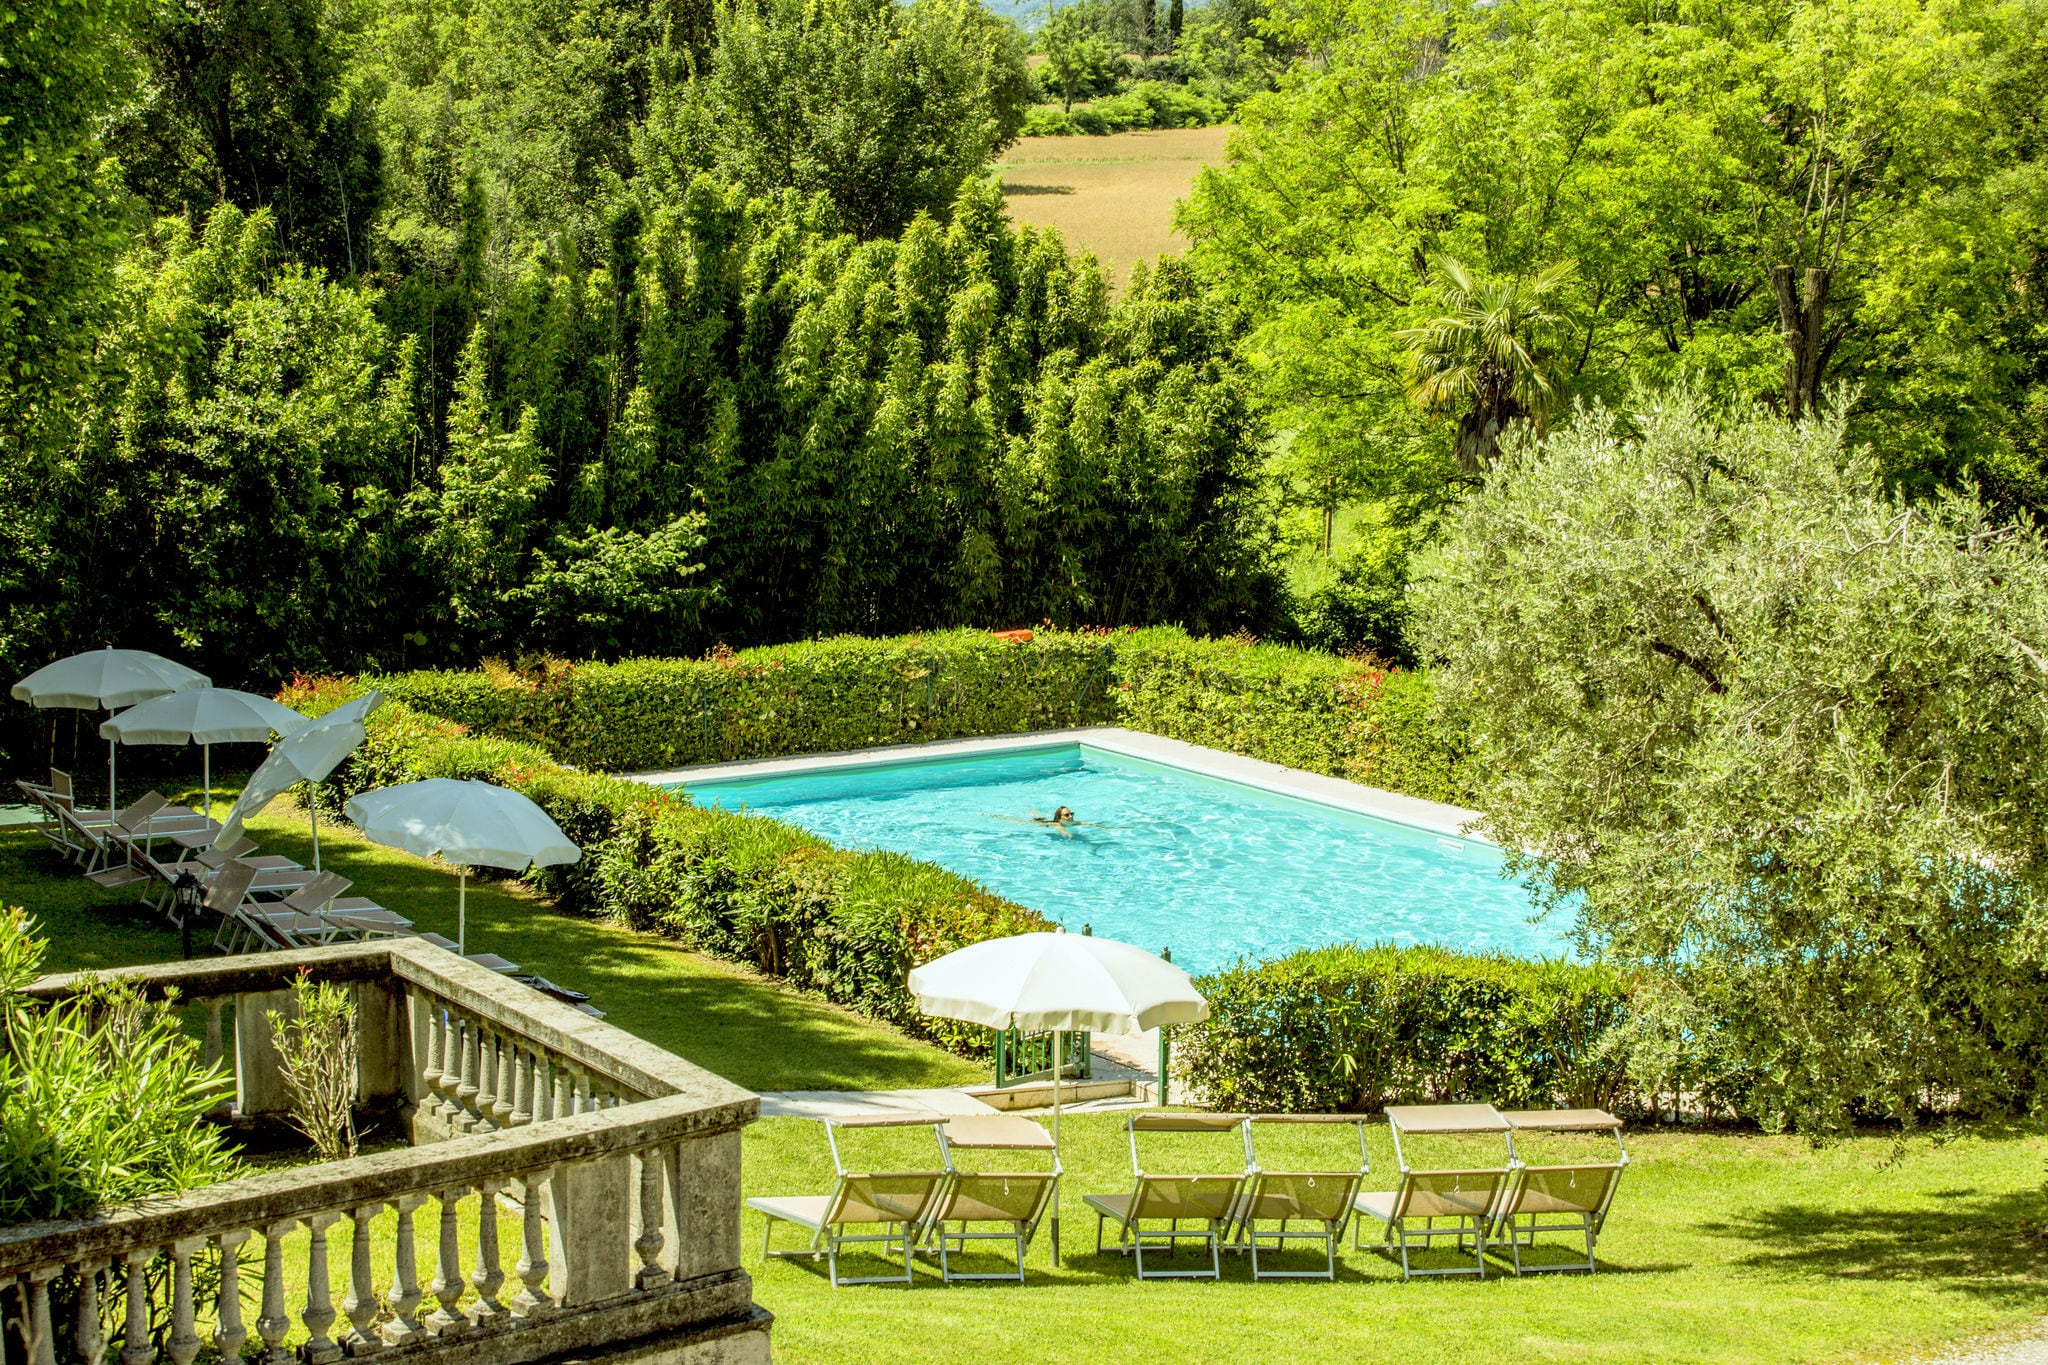 This pleasant residence is situated in Salò, close to the famous Lake Garda